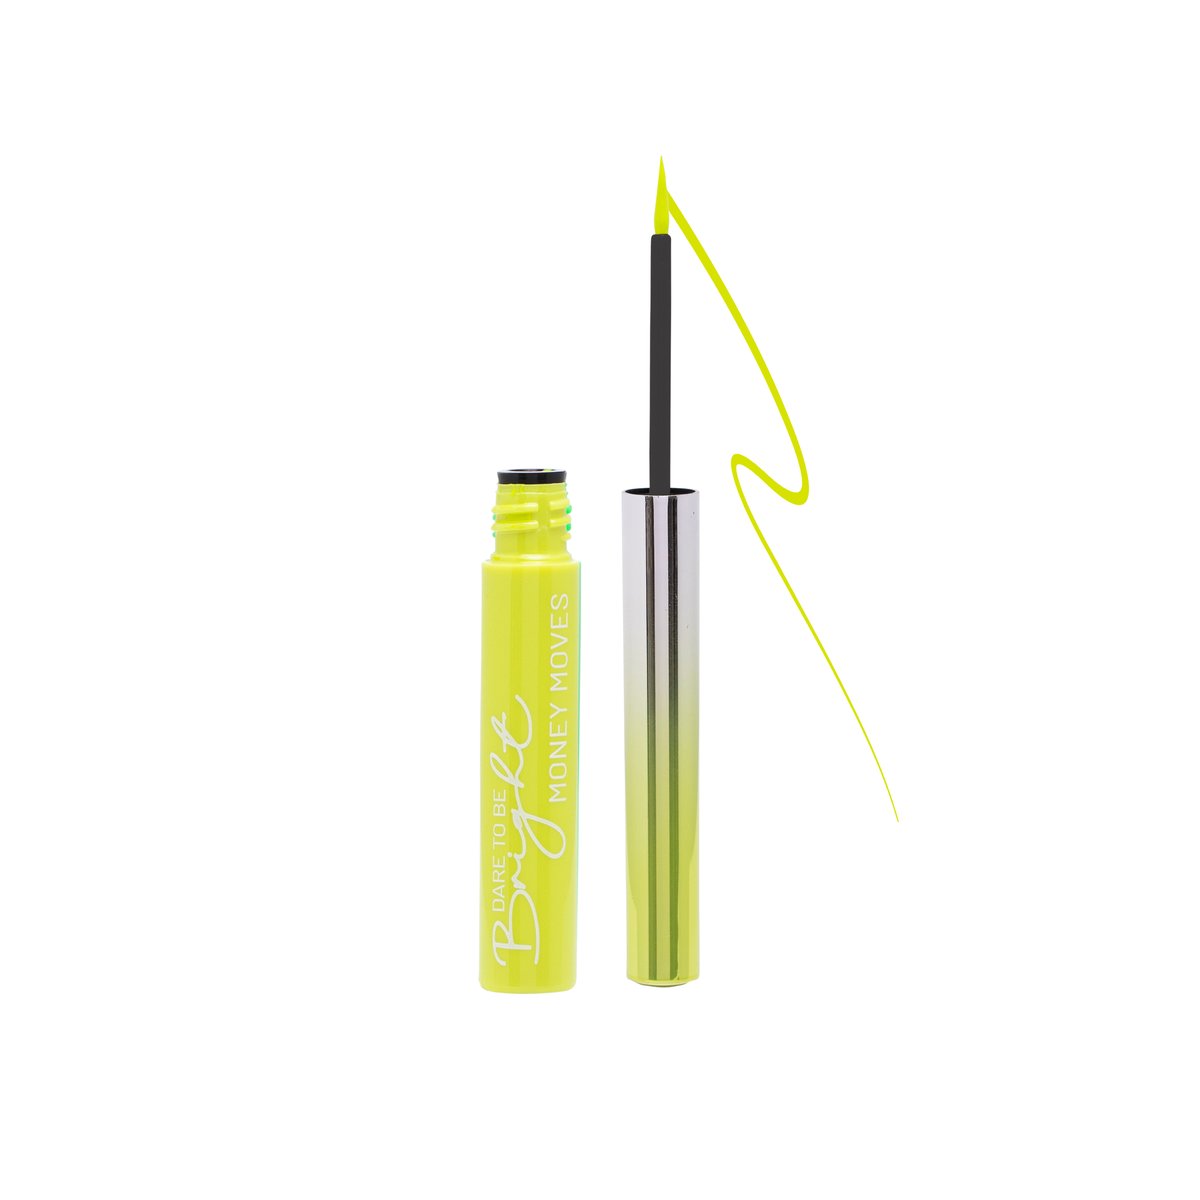 DARE TO BE BRIGHT EYELINER  BEAUTY CREATIONS